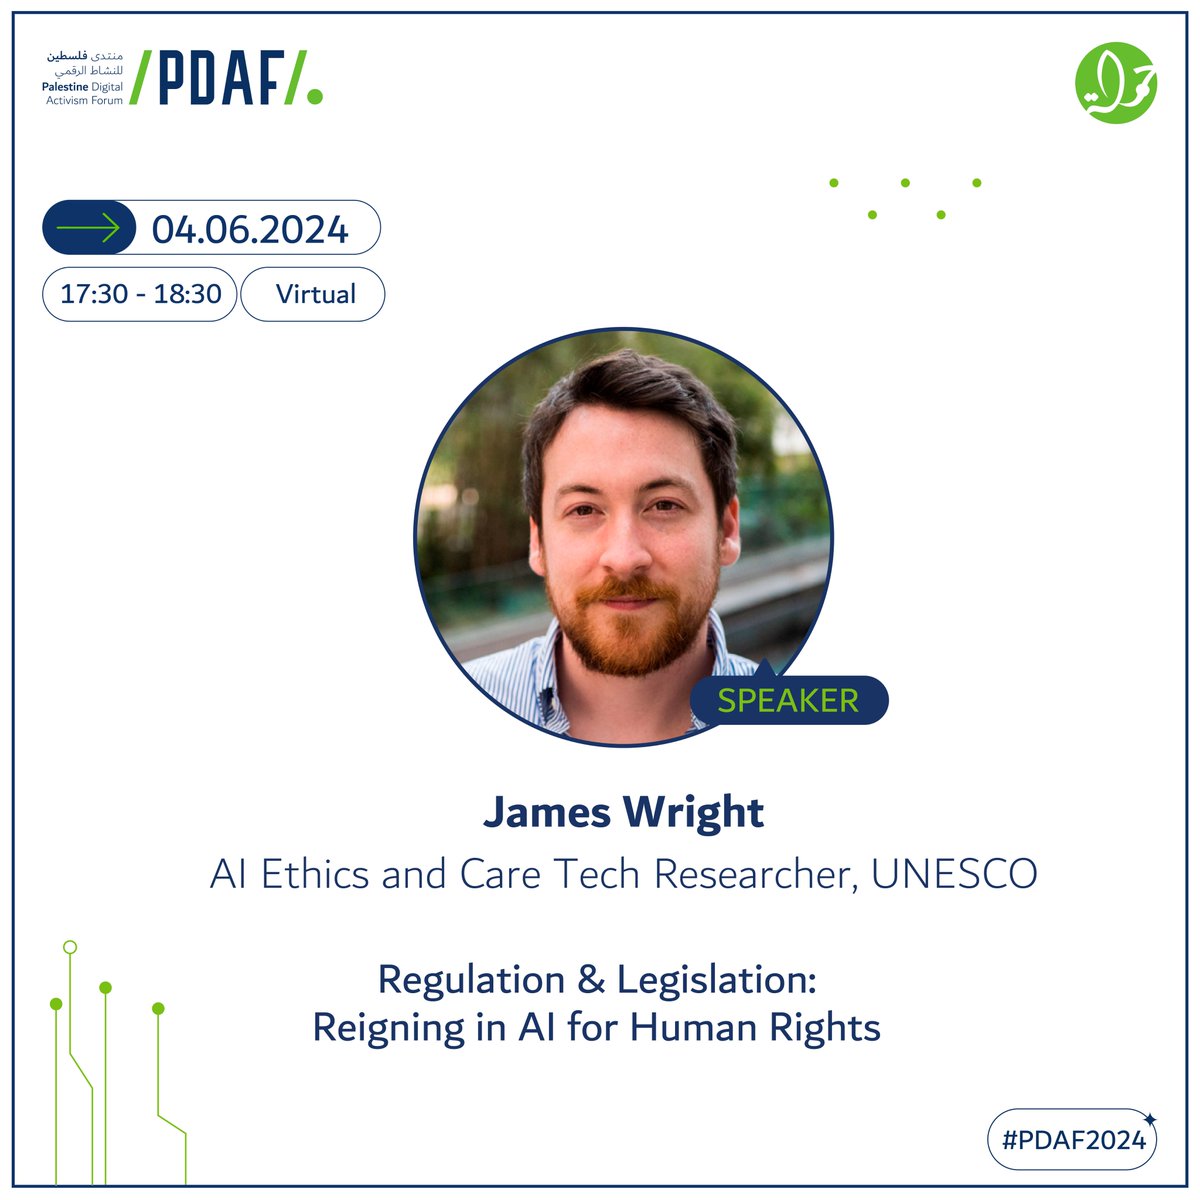 📢Join James Wright, one of the speakers in the session: “Regulation & Legislation: Reigning in AI for Human Rights” @jms_wright @UNESCO Reserve your seat now: pdaf.net #PDAF2024